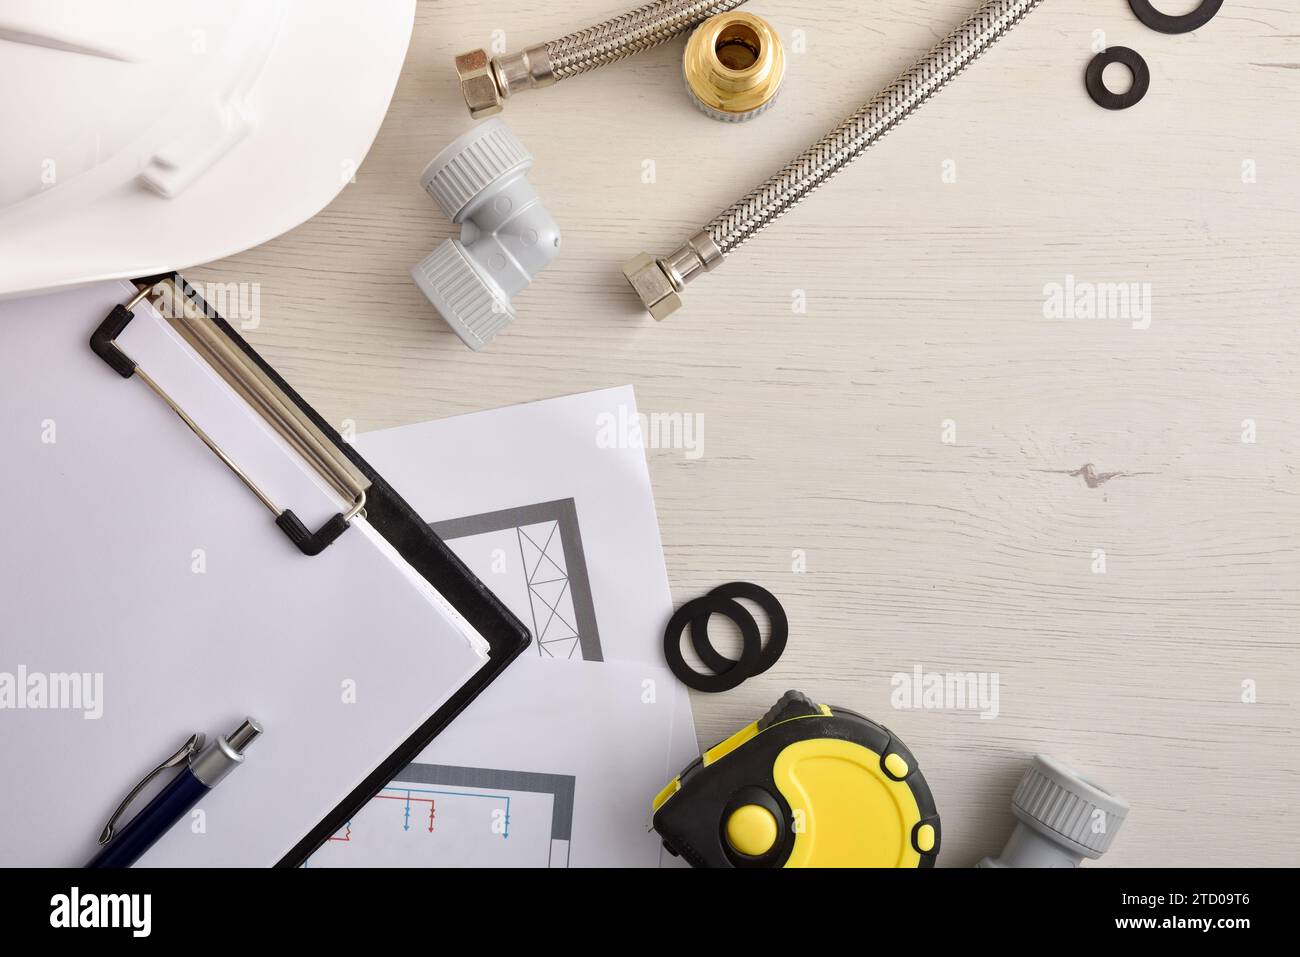 Concept of review of water installation elements in homes with flat notepad and water installation accessories. Top view. Horizontal composition. Stock Photo